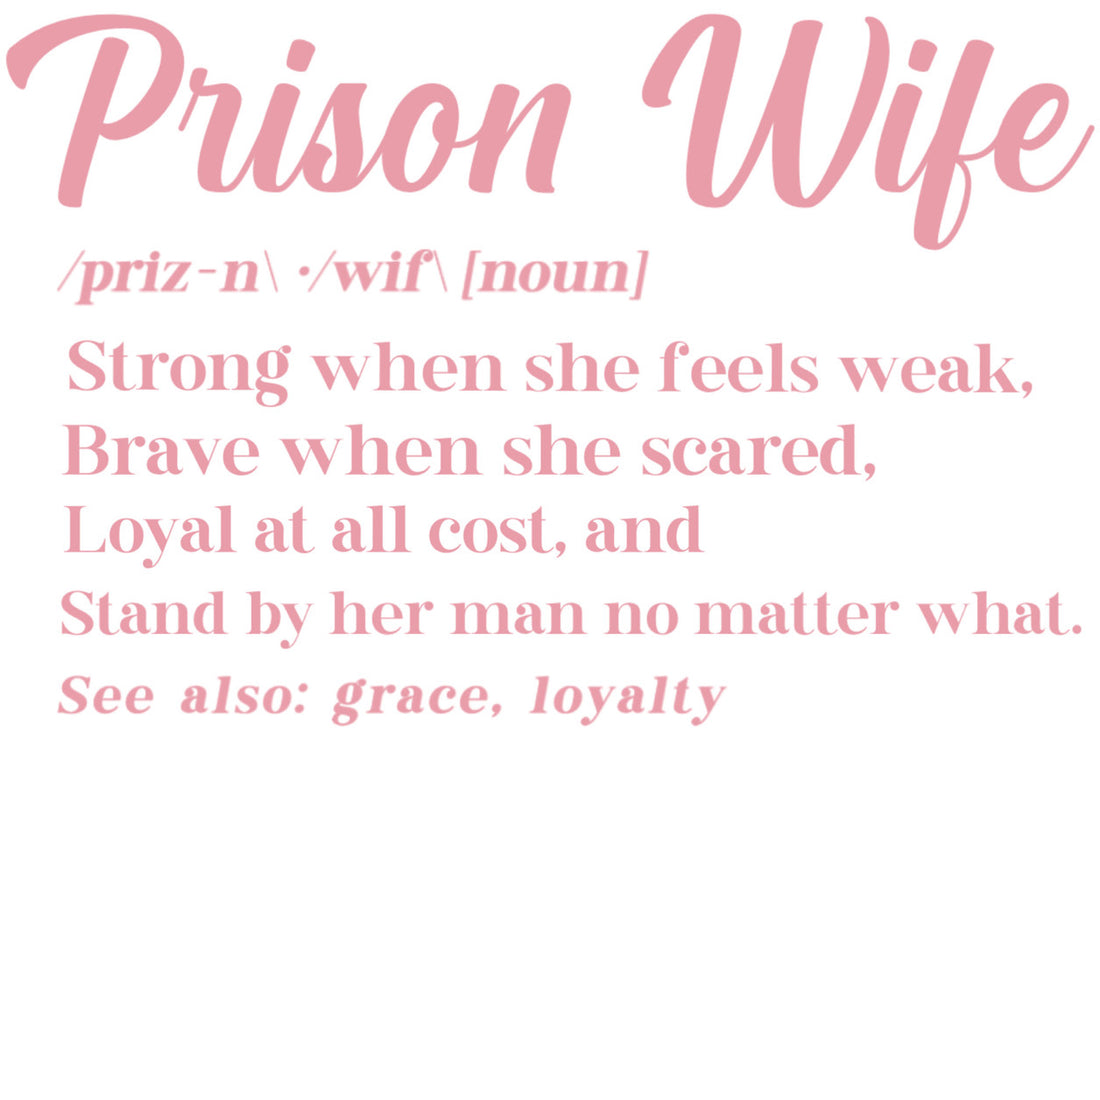 Prison Wife Definition Strong whenshe feel weak, Brave when she scared Loyal at all cost, and stand by her man no matter what 